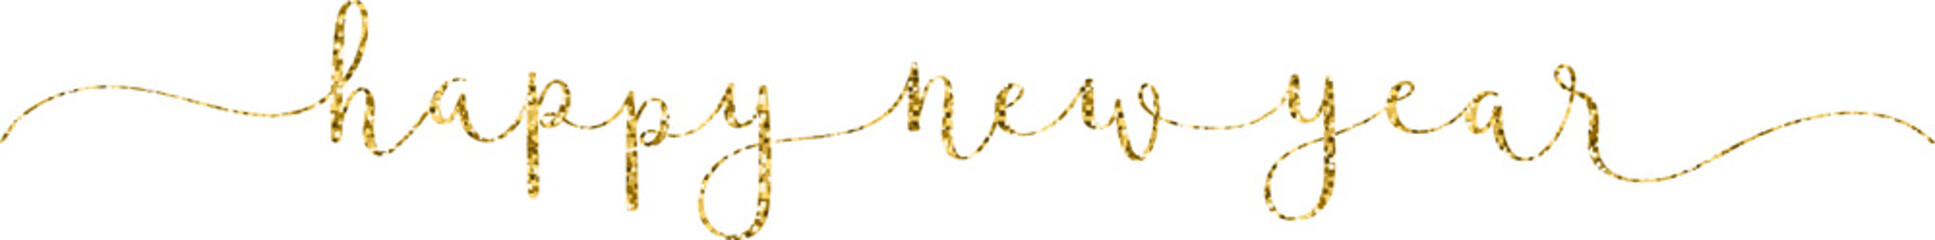 Canvas Print - HAPPY NEW YEAR gold glitter brush calligraphy banner on transparent background